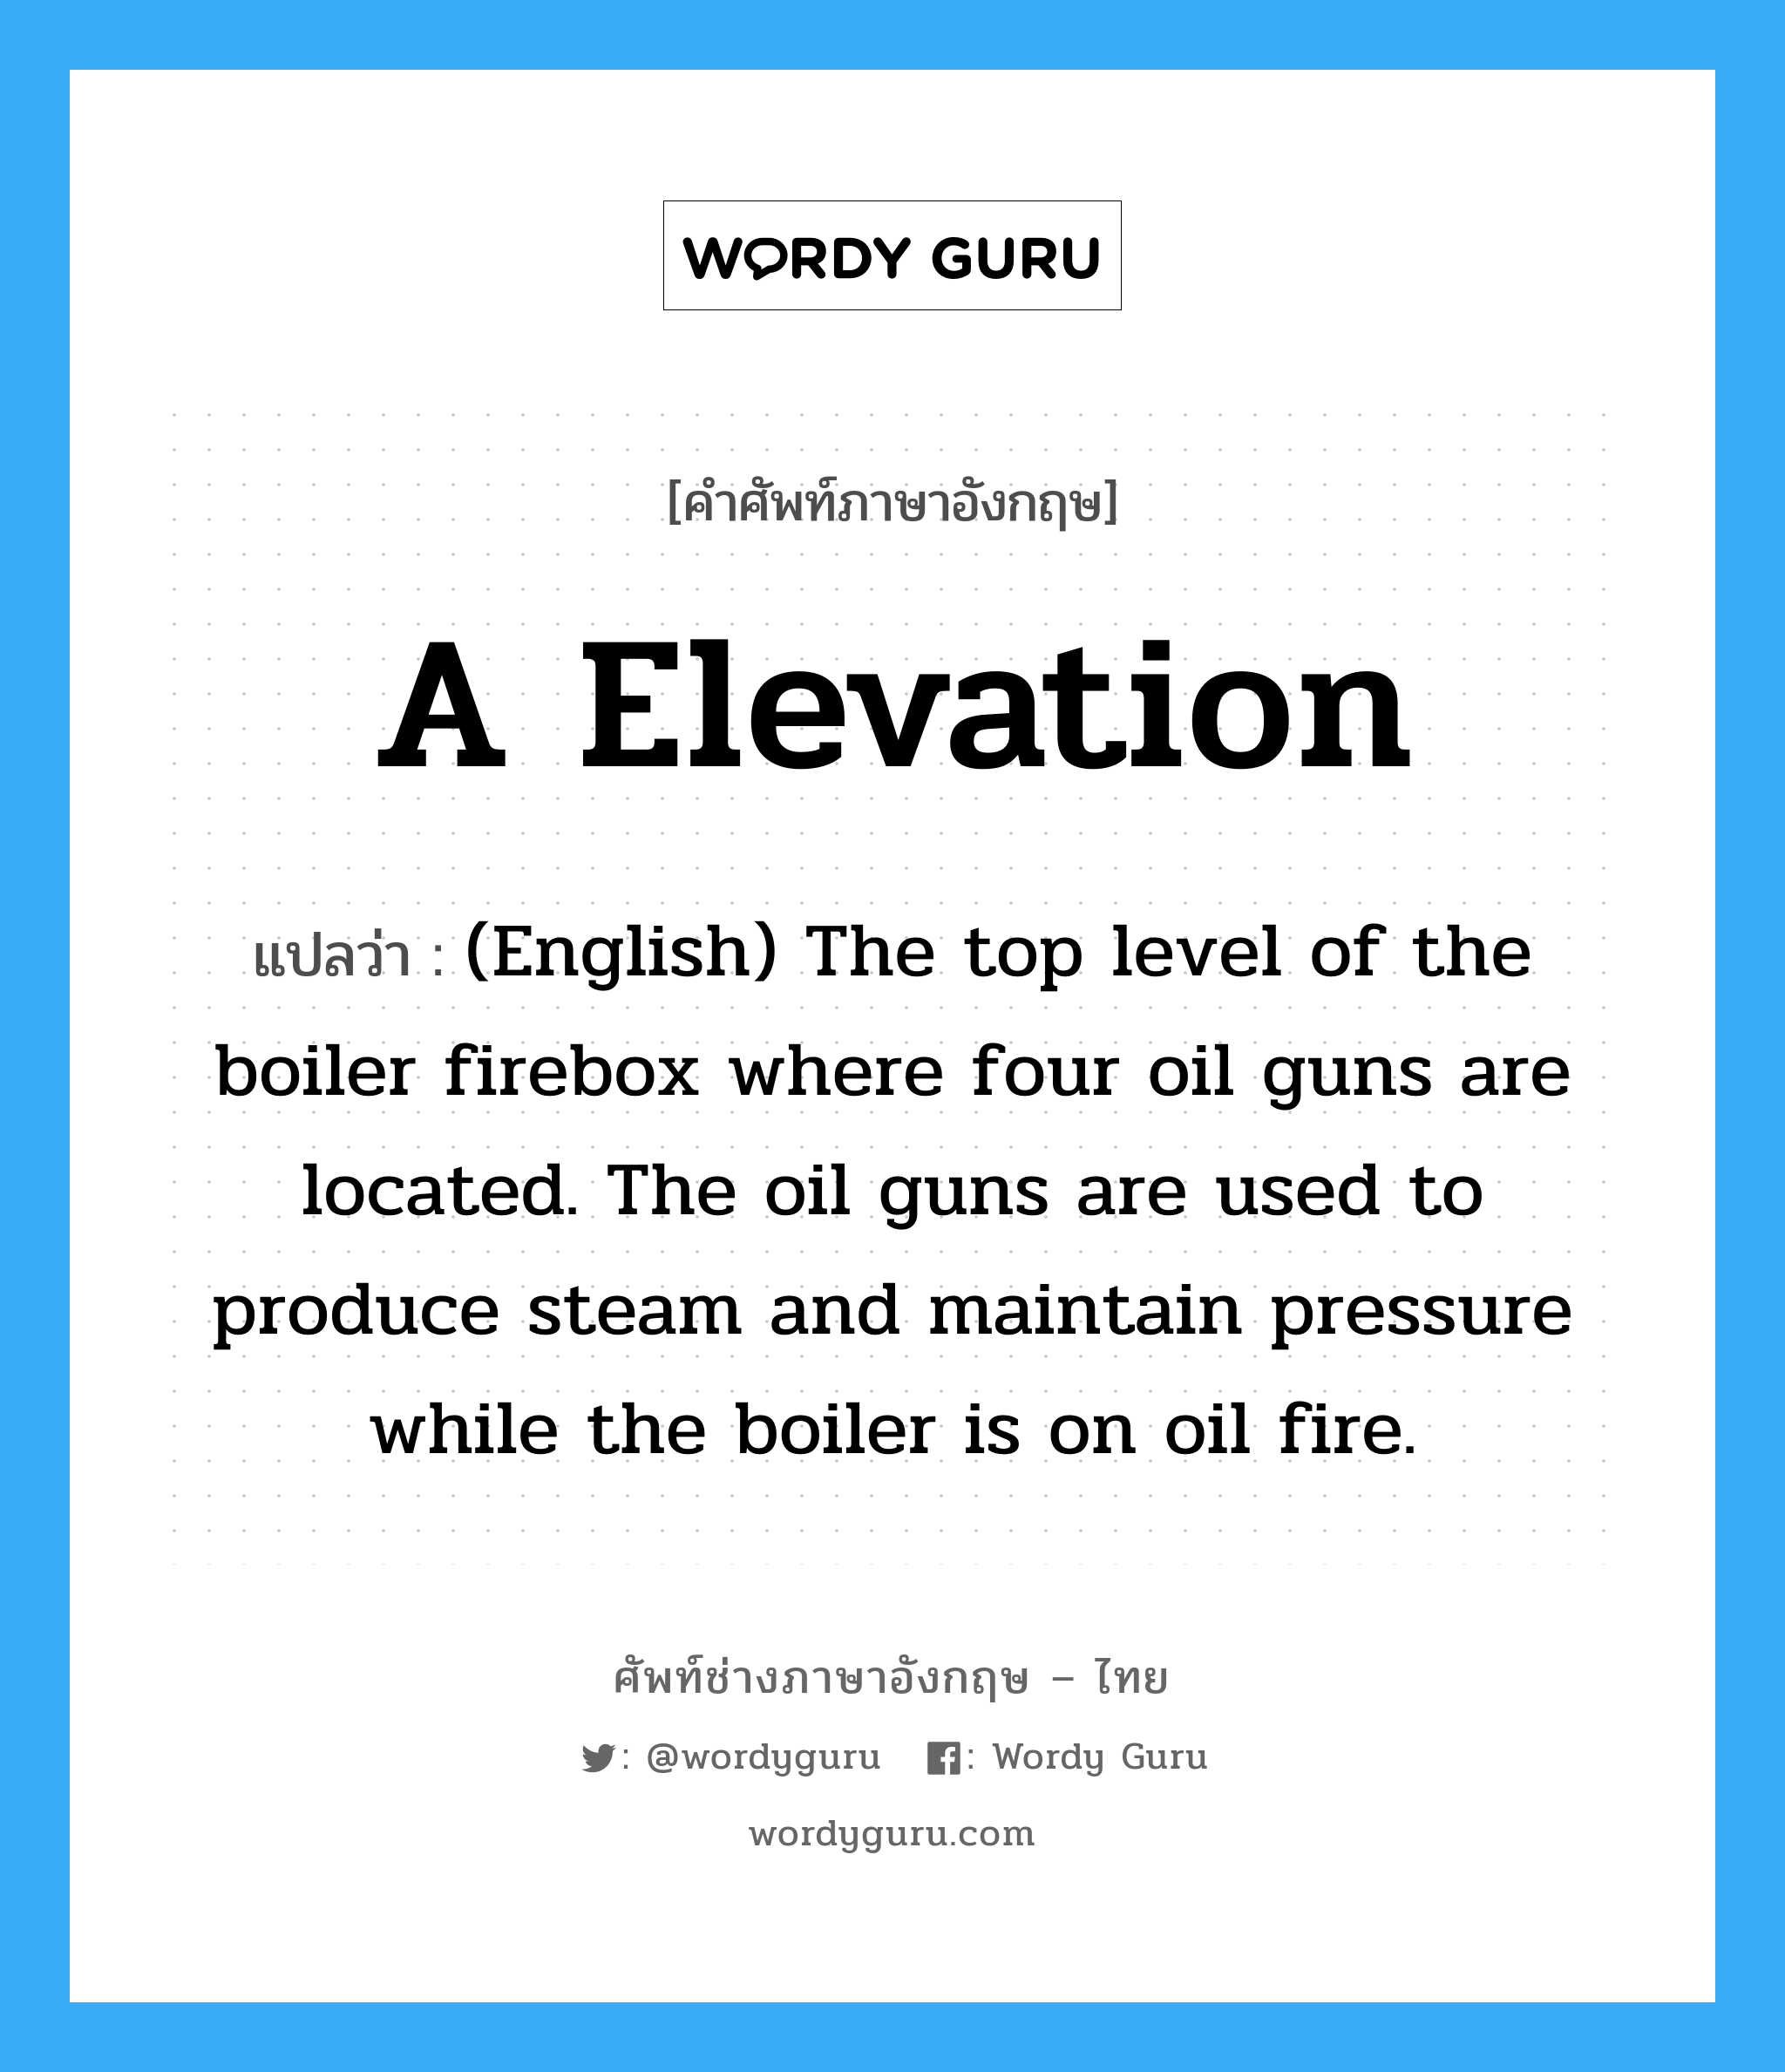 (English) The top level of the boiler firebox where four oil guns are located. The oil guns are used to produce steam and maintain pressure while the boiler is on oil fire. ภาษาอังกฤษ?, คำศัพท์ช่างภาษาอังกฤษ - ไทย (English) The top level of the boiler firebox where four oil guns are located. The oil guns are used to produce steam and maintain pressure while the boiler is on oil fire. คำศัพท์ภาษาอังกฤษ (English) The top level of the boiler firebox where four oil guns are located. The oil guns are used to produce steam and maintain pressure while the boiler is on oil fire. แปลว่า A Elevation